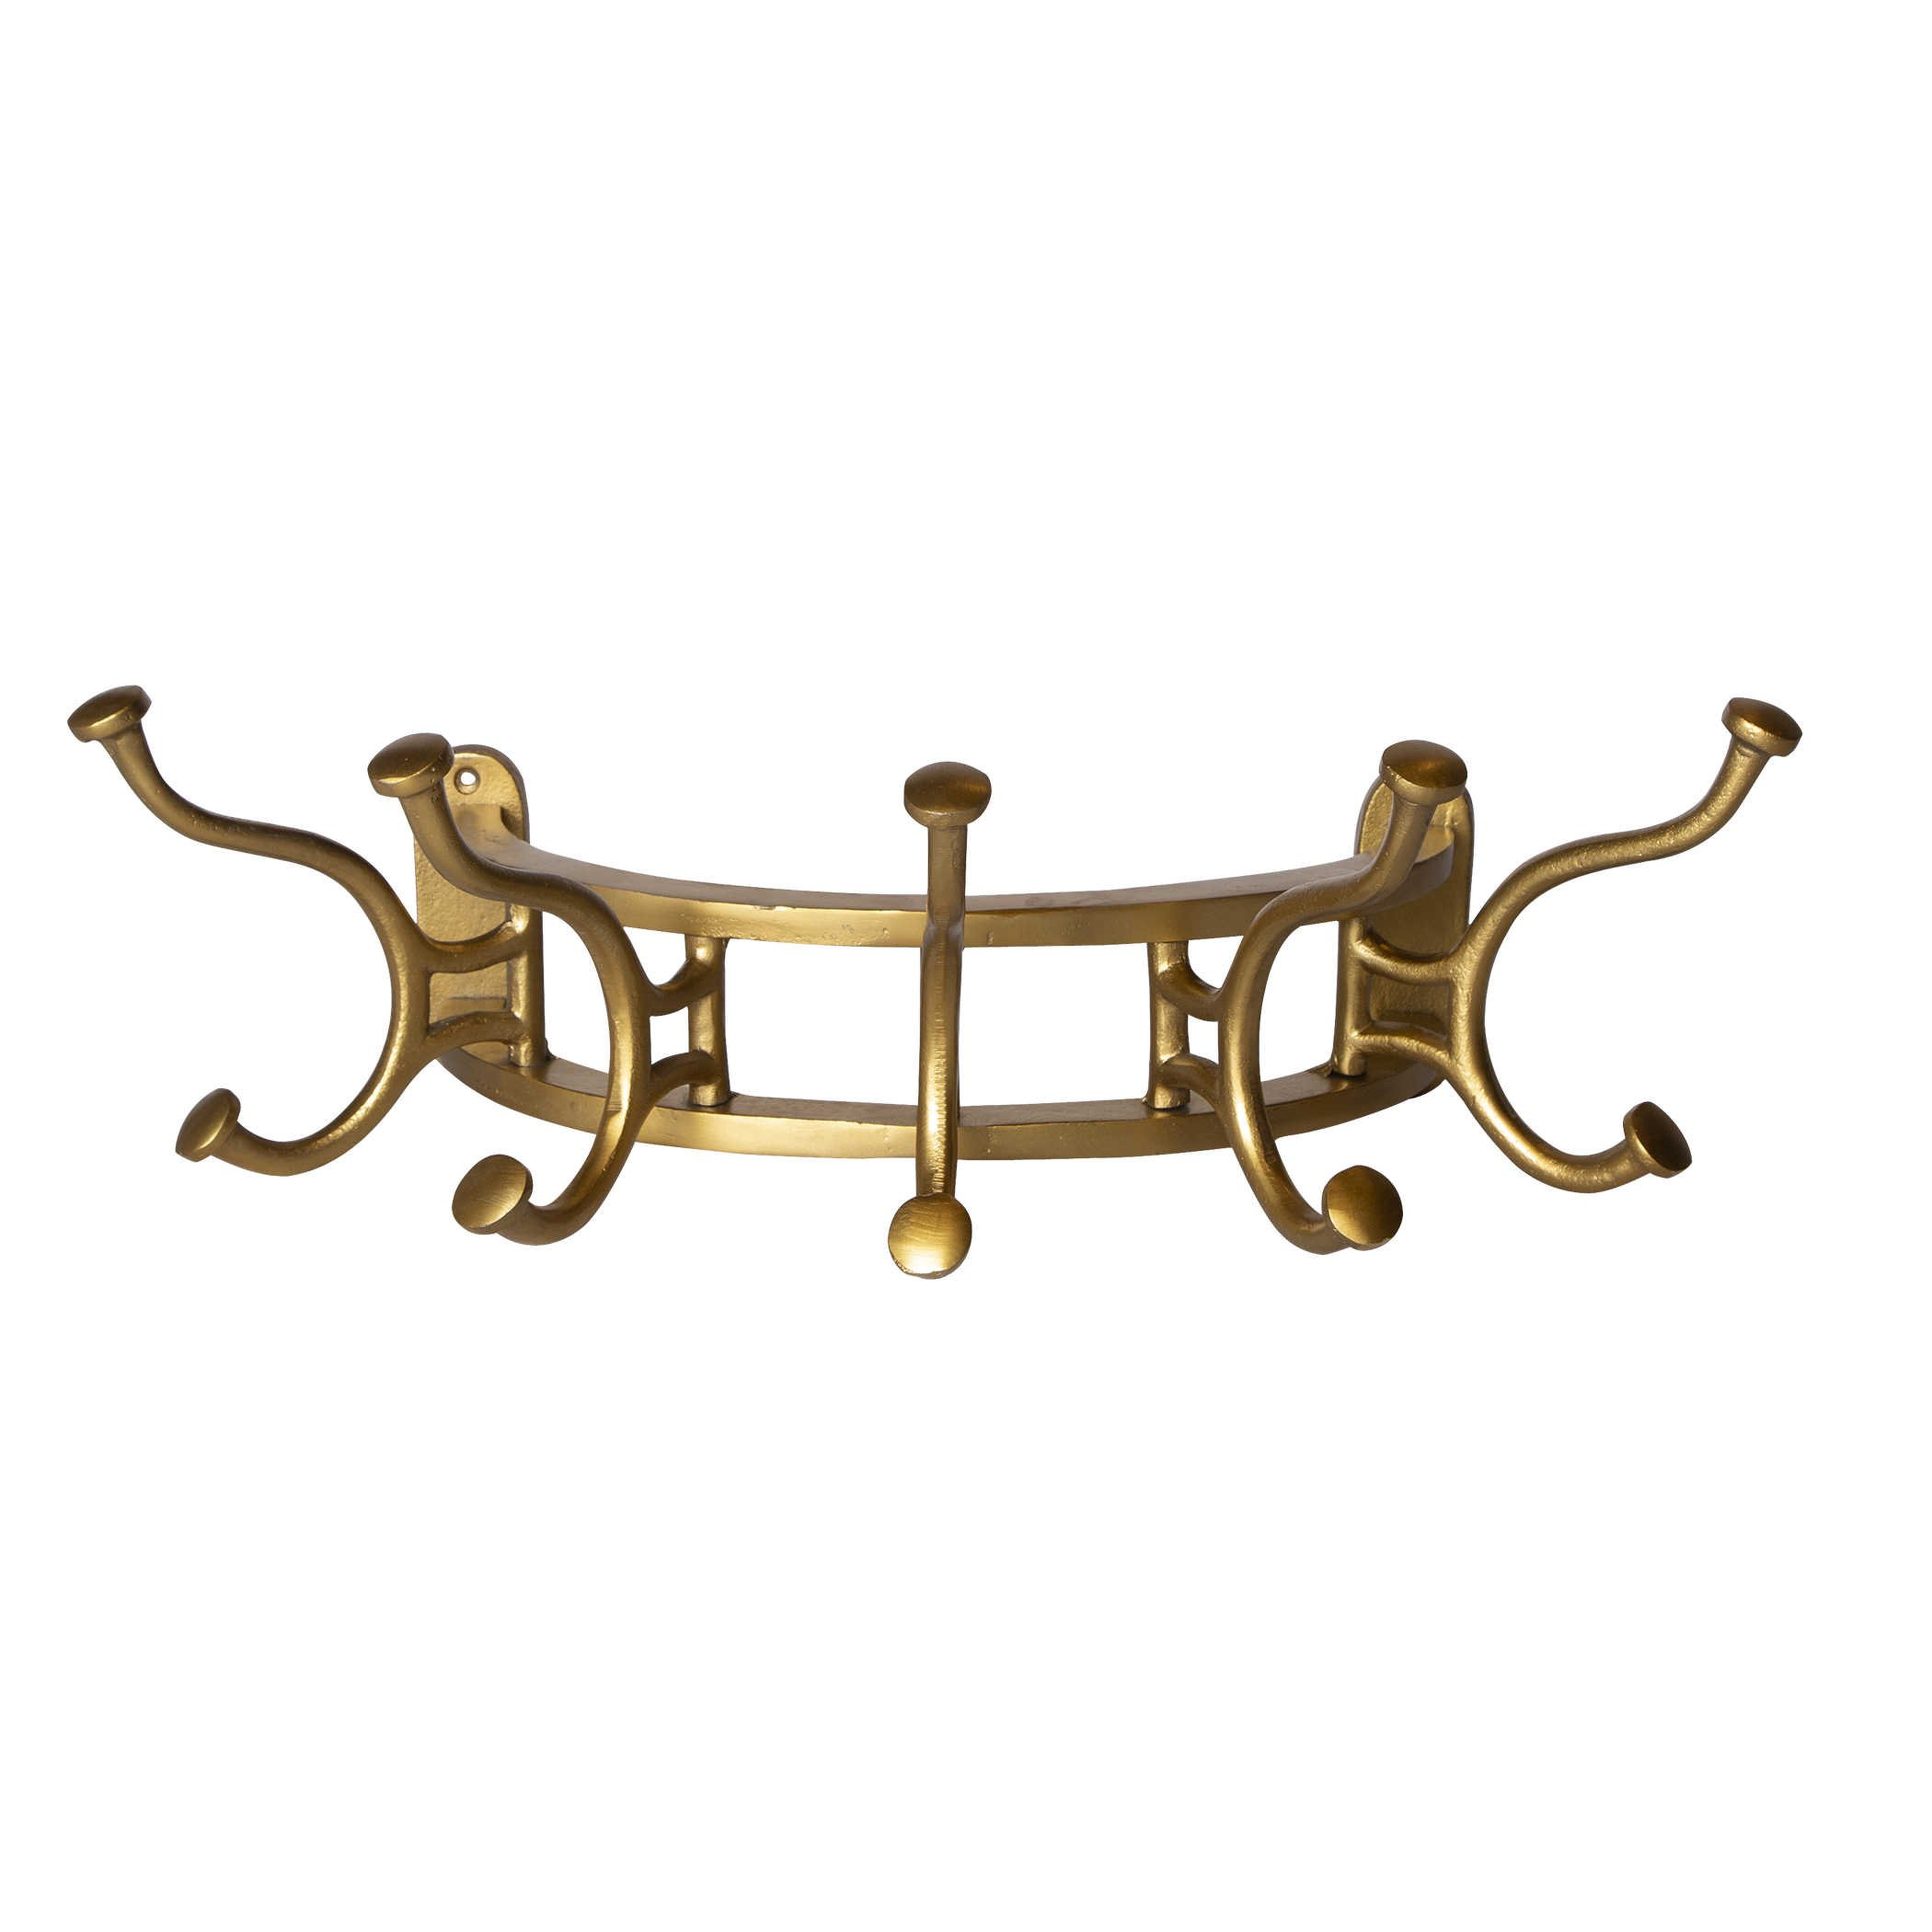 Starling Wall Mounted Coat Rack - Hudsonhill Foundry